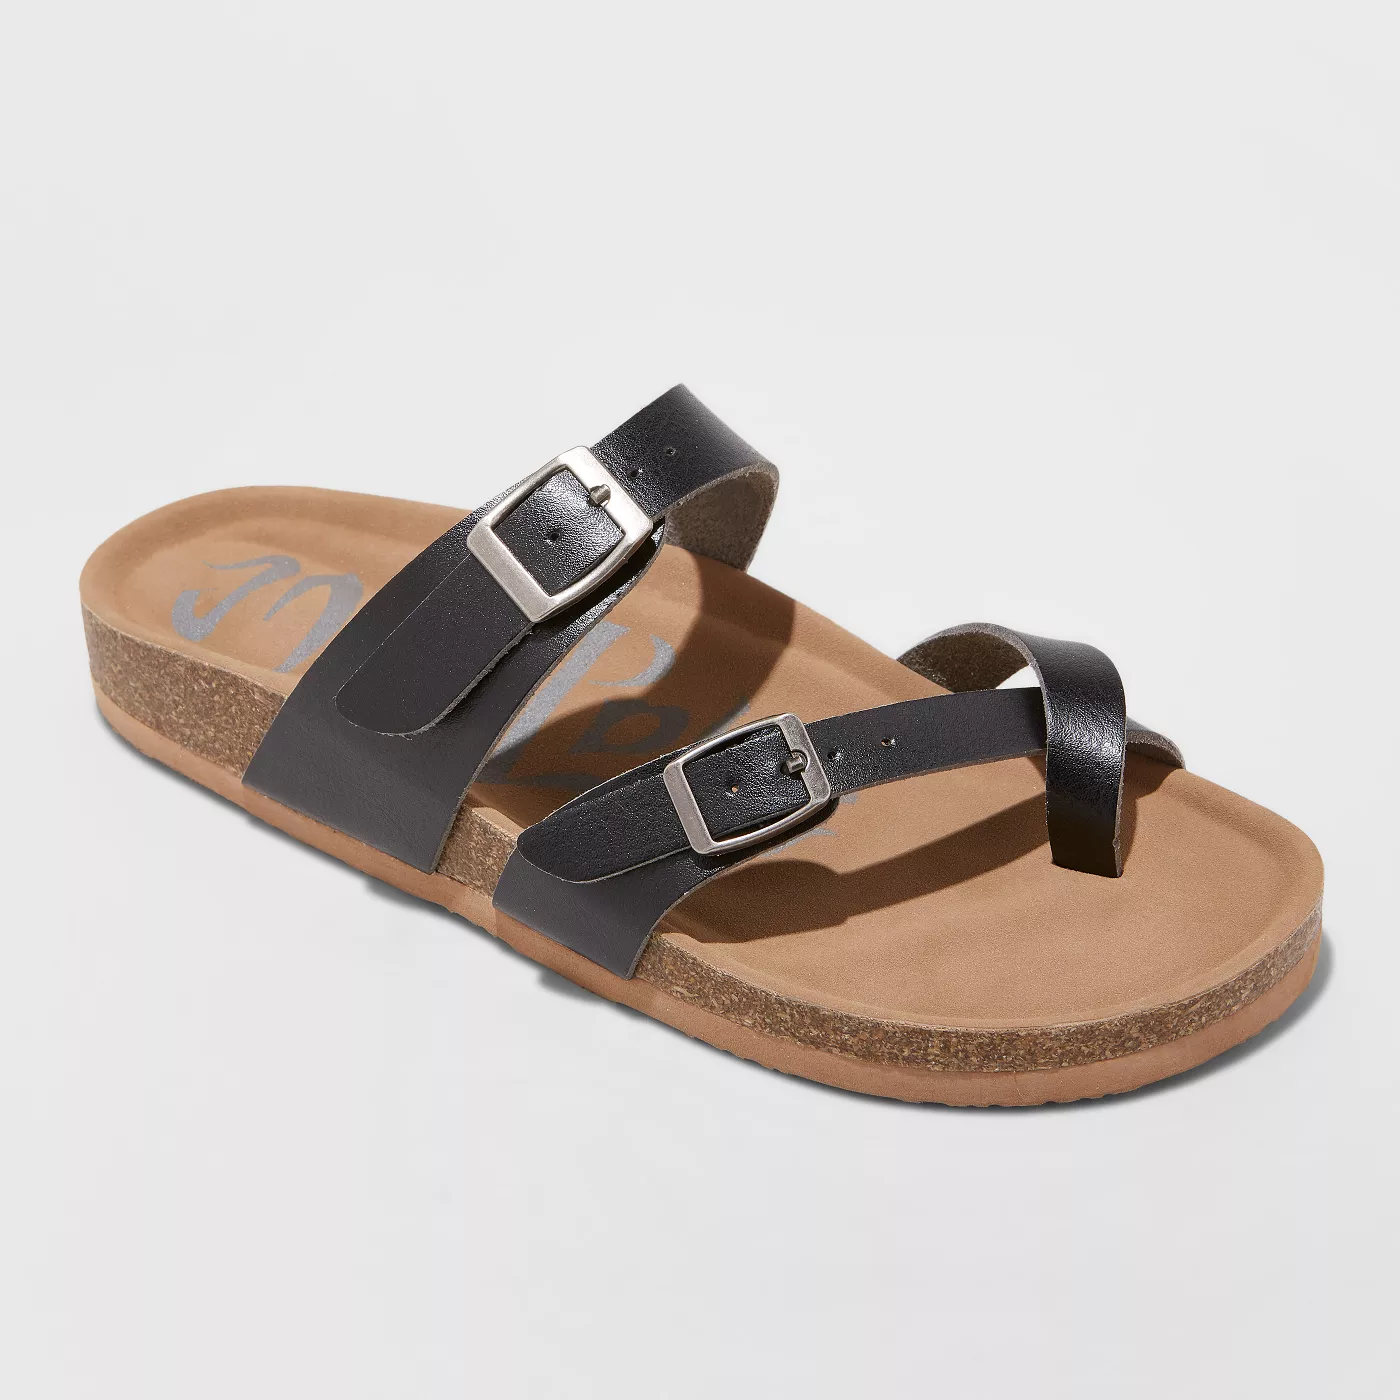 Women's Mad Love Prudence Footbed Sandals - image 1 of 10